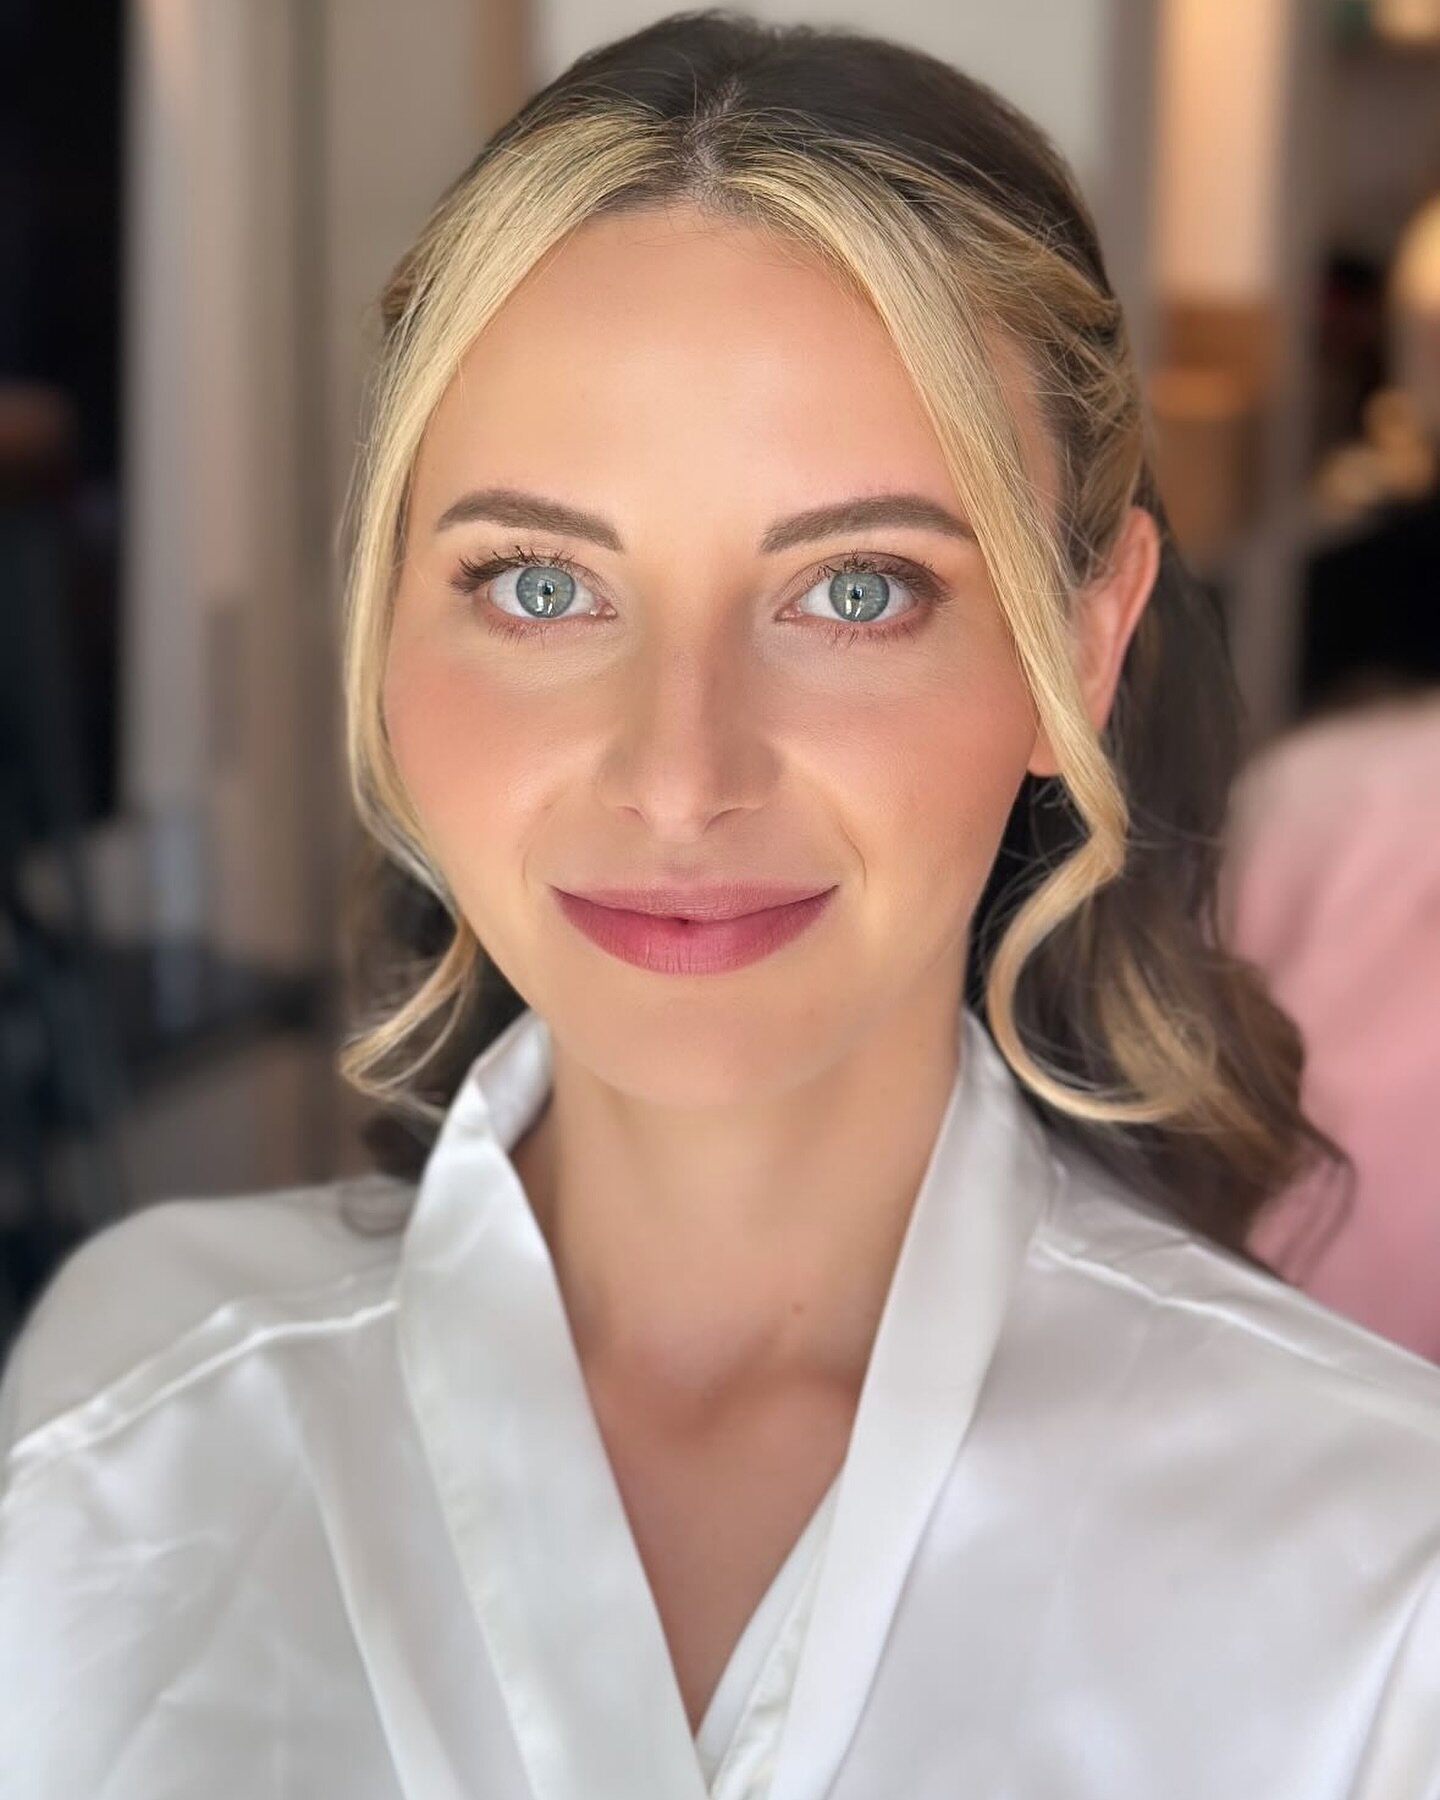 Natural glam for the lovely Madison on her wedding day. 

Using Lanc&ocirc;me Tient Idol Ultra Wear Foundation for that flawless but lightweight coverage for the skin. Lips @charlottetilbury Pillow Talk. 

Venue @therayhotel 
Planner @ramoseventsfl 
